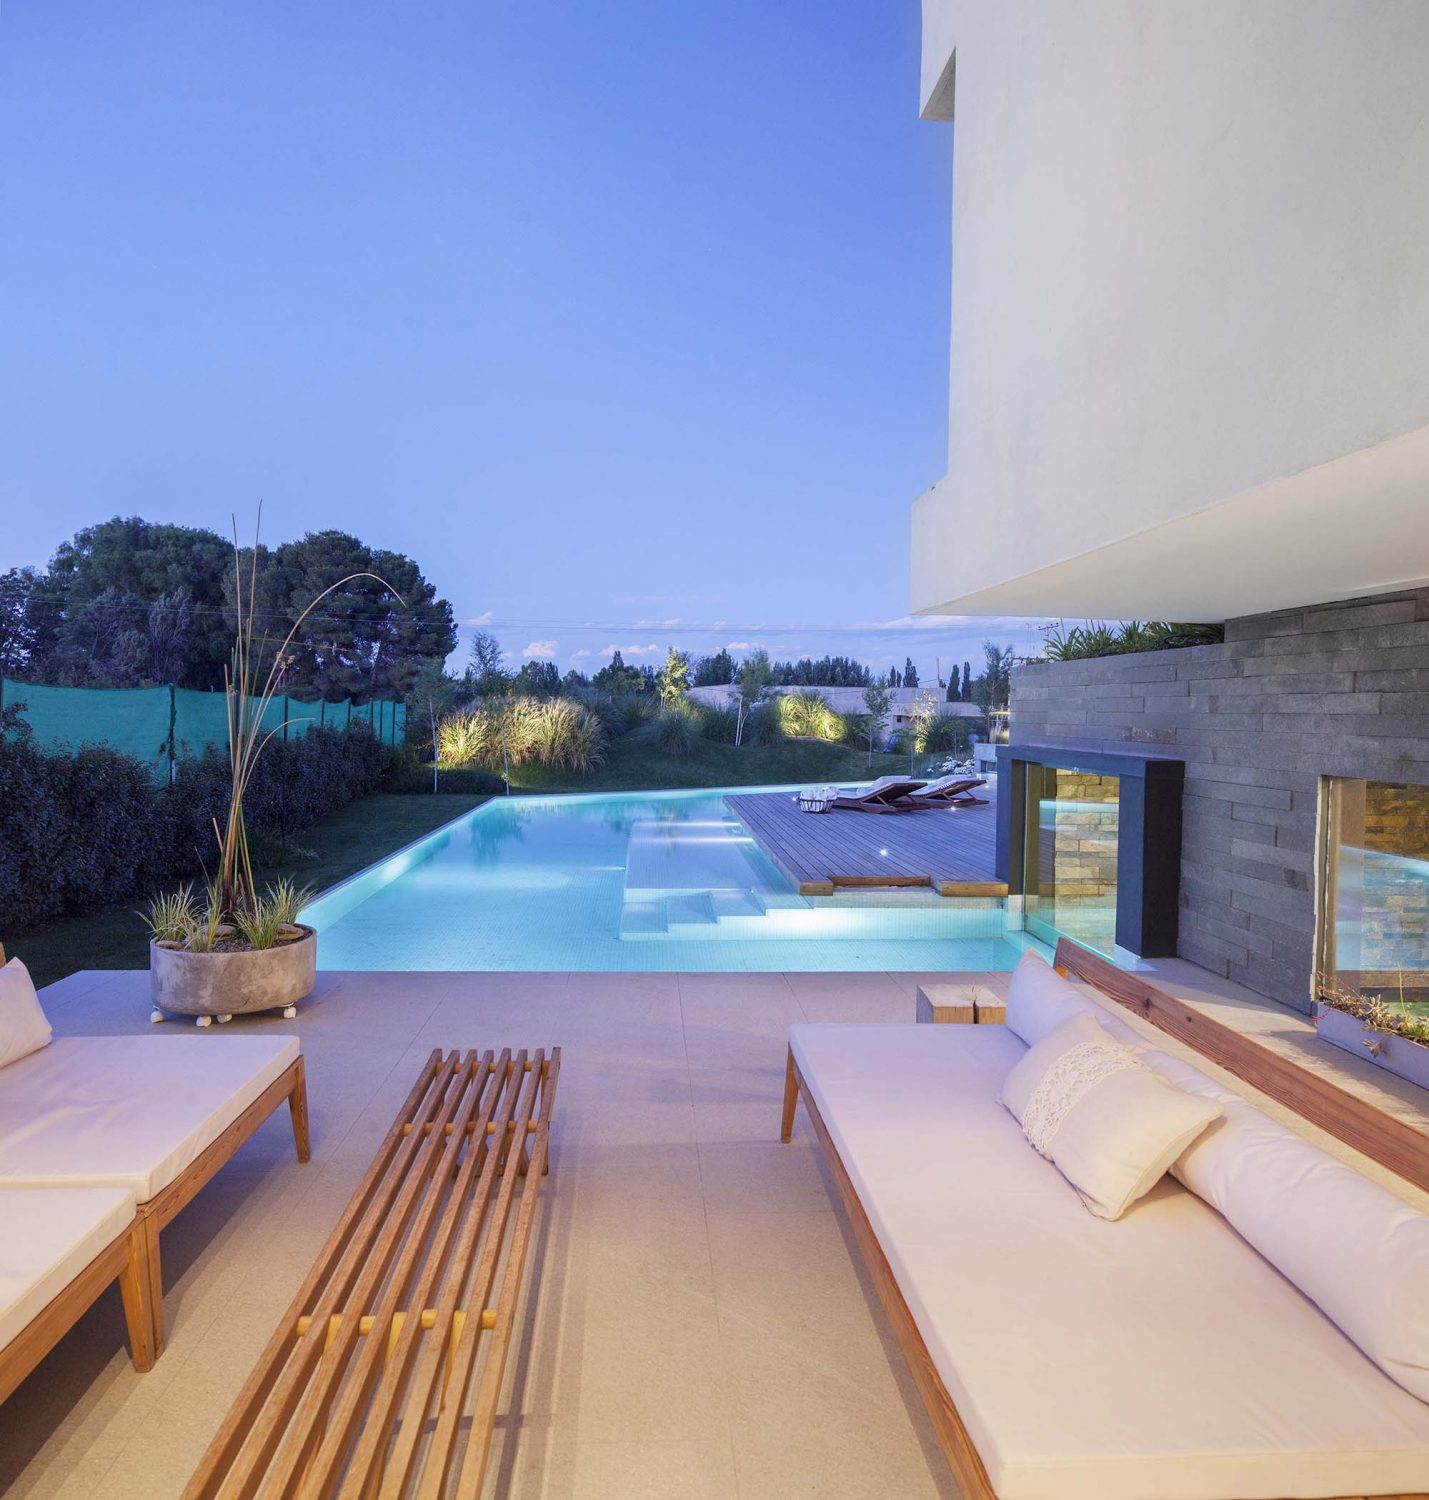 Casa Rampa by Andres Remy Arquitectos